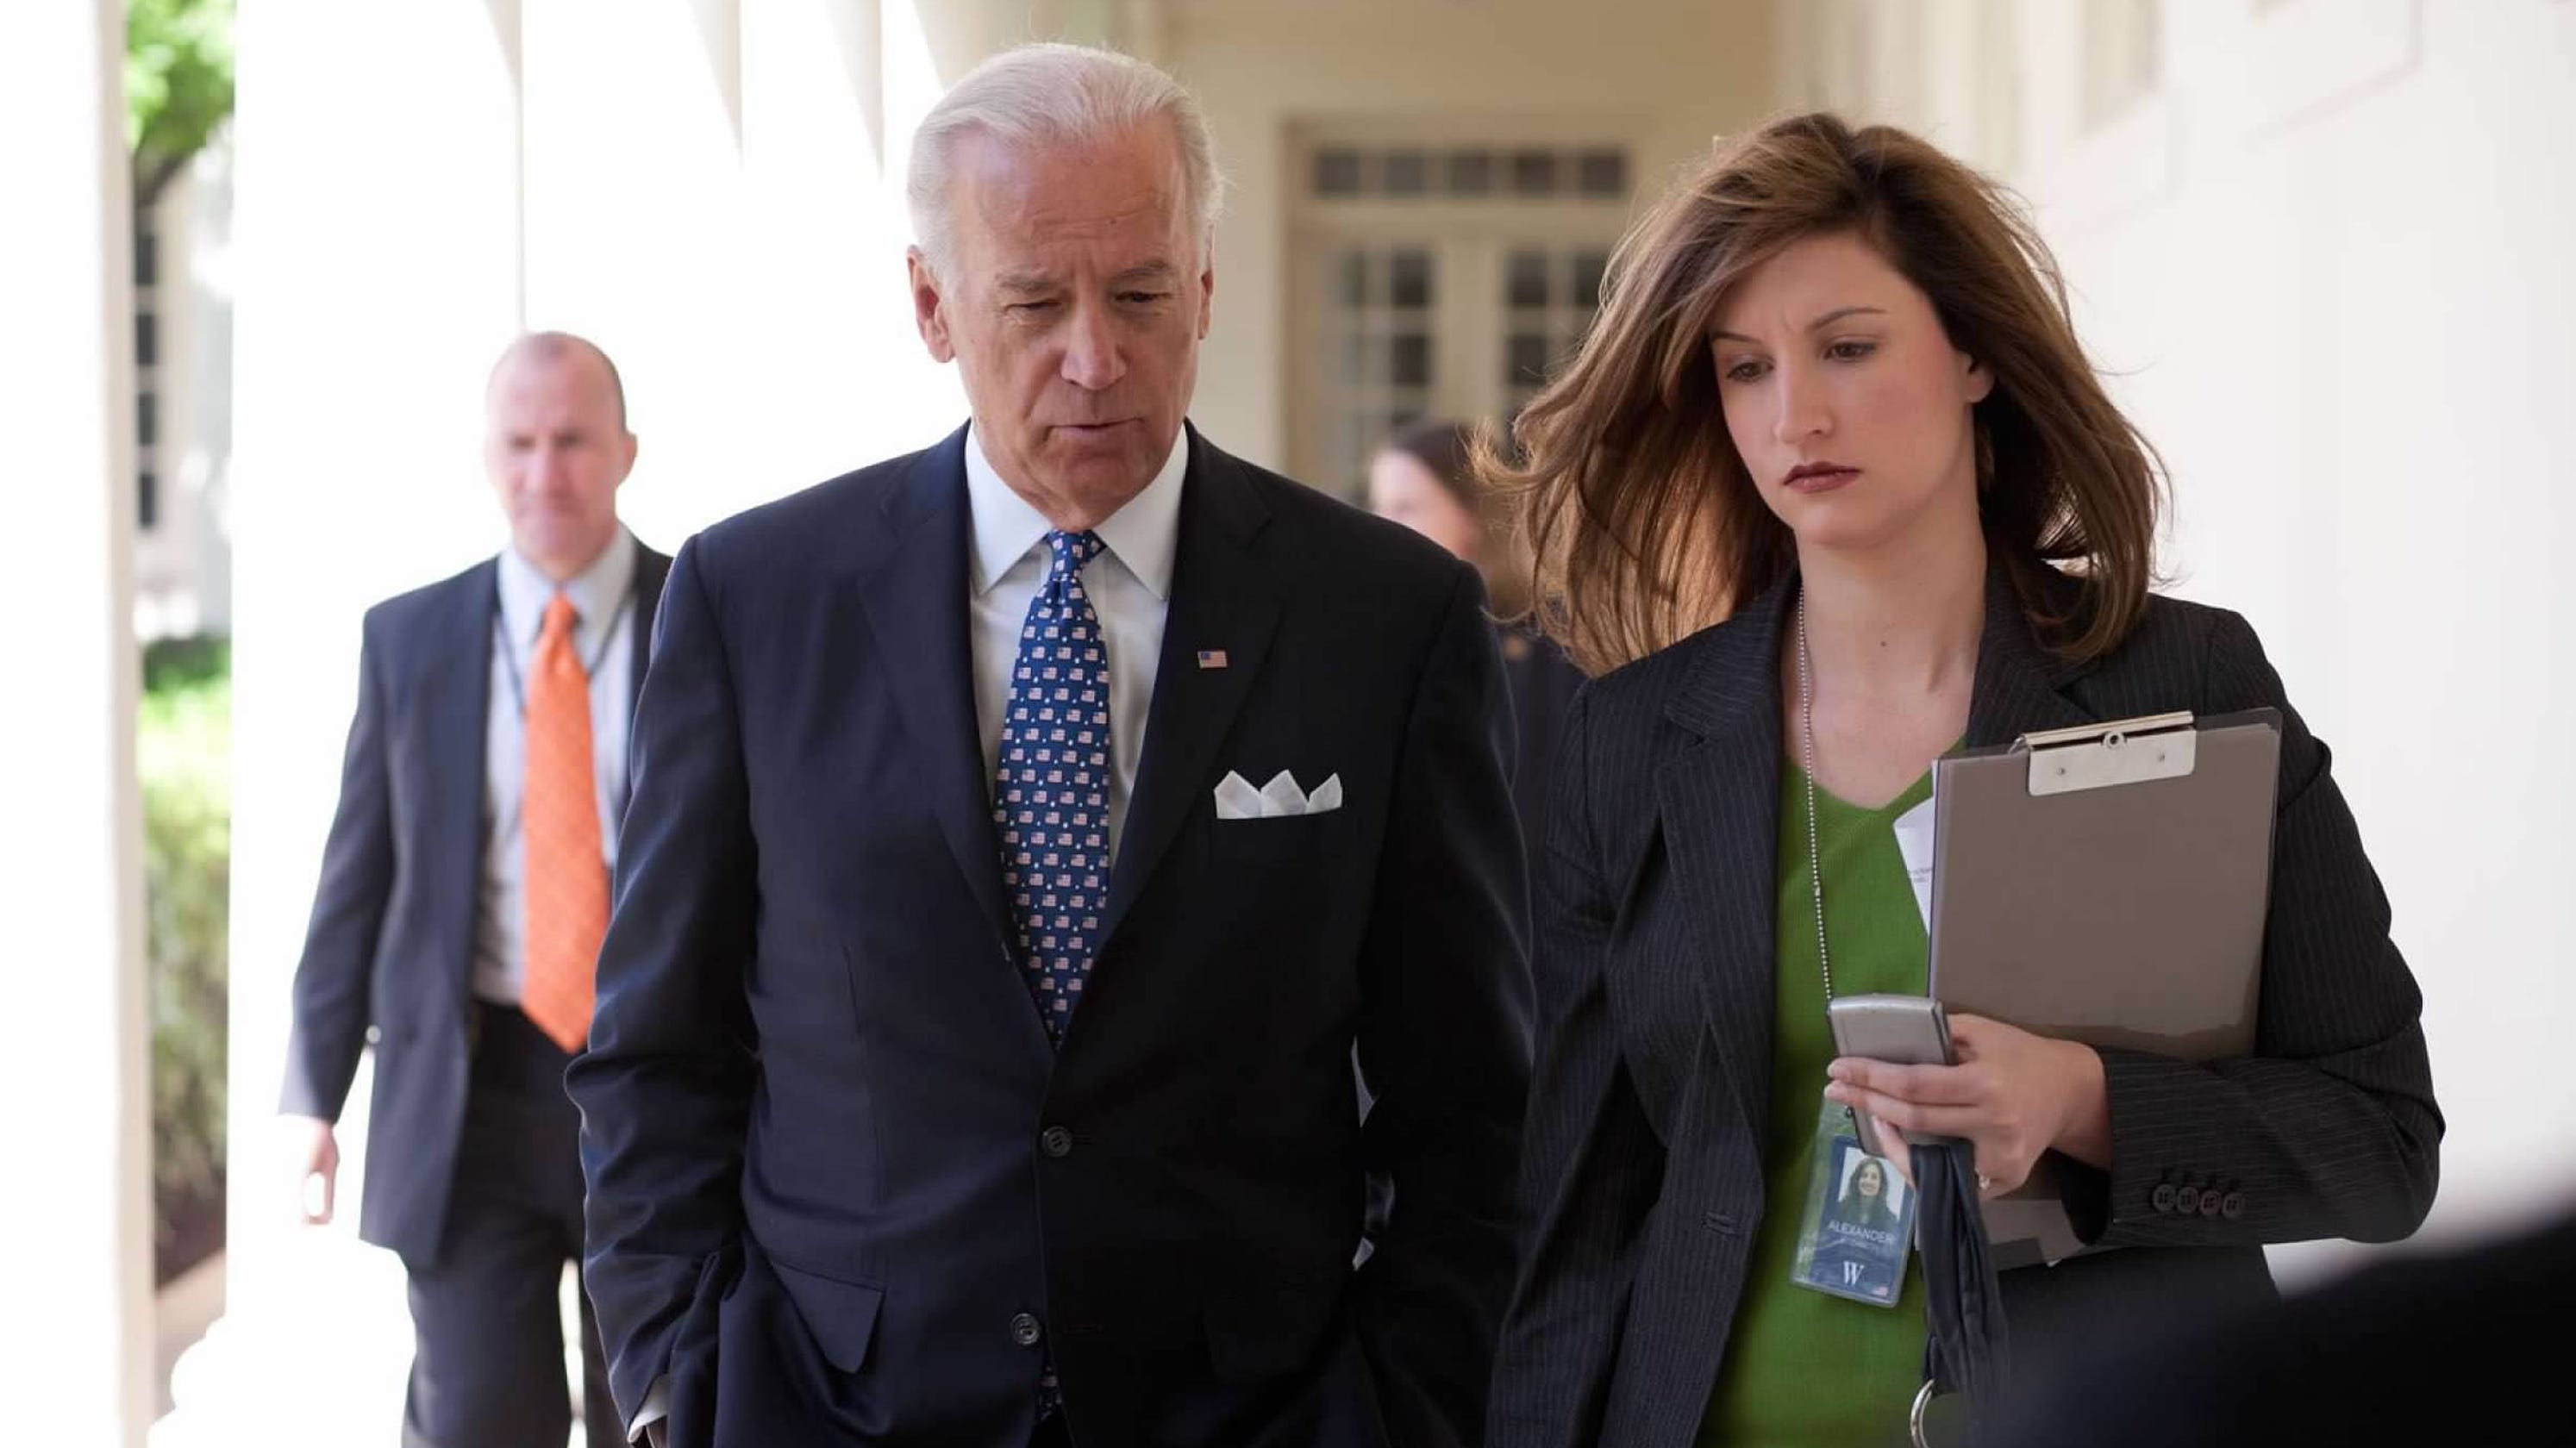 Joe Biden values and supports women in ways not many people know about